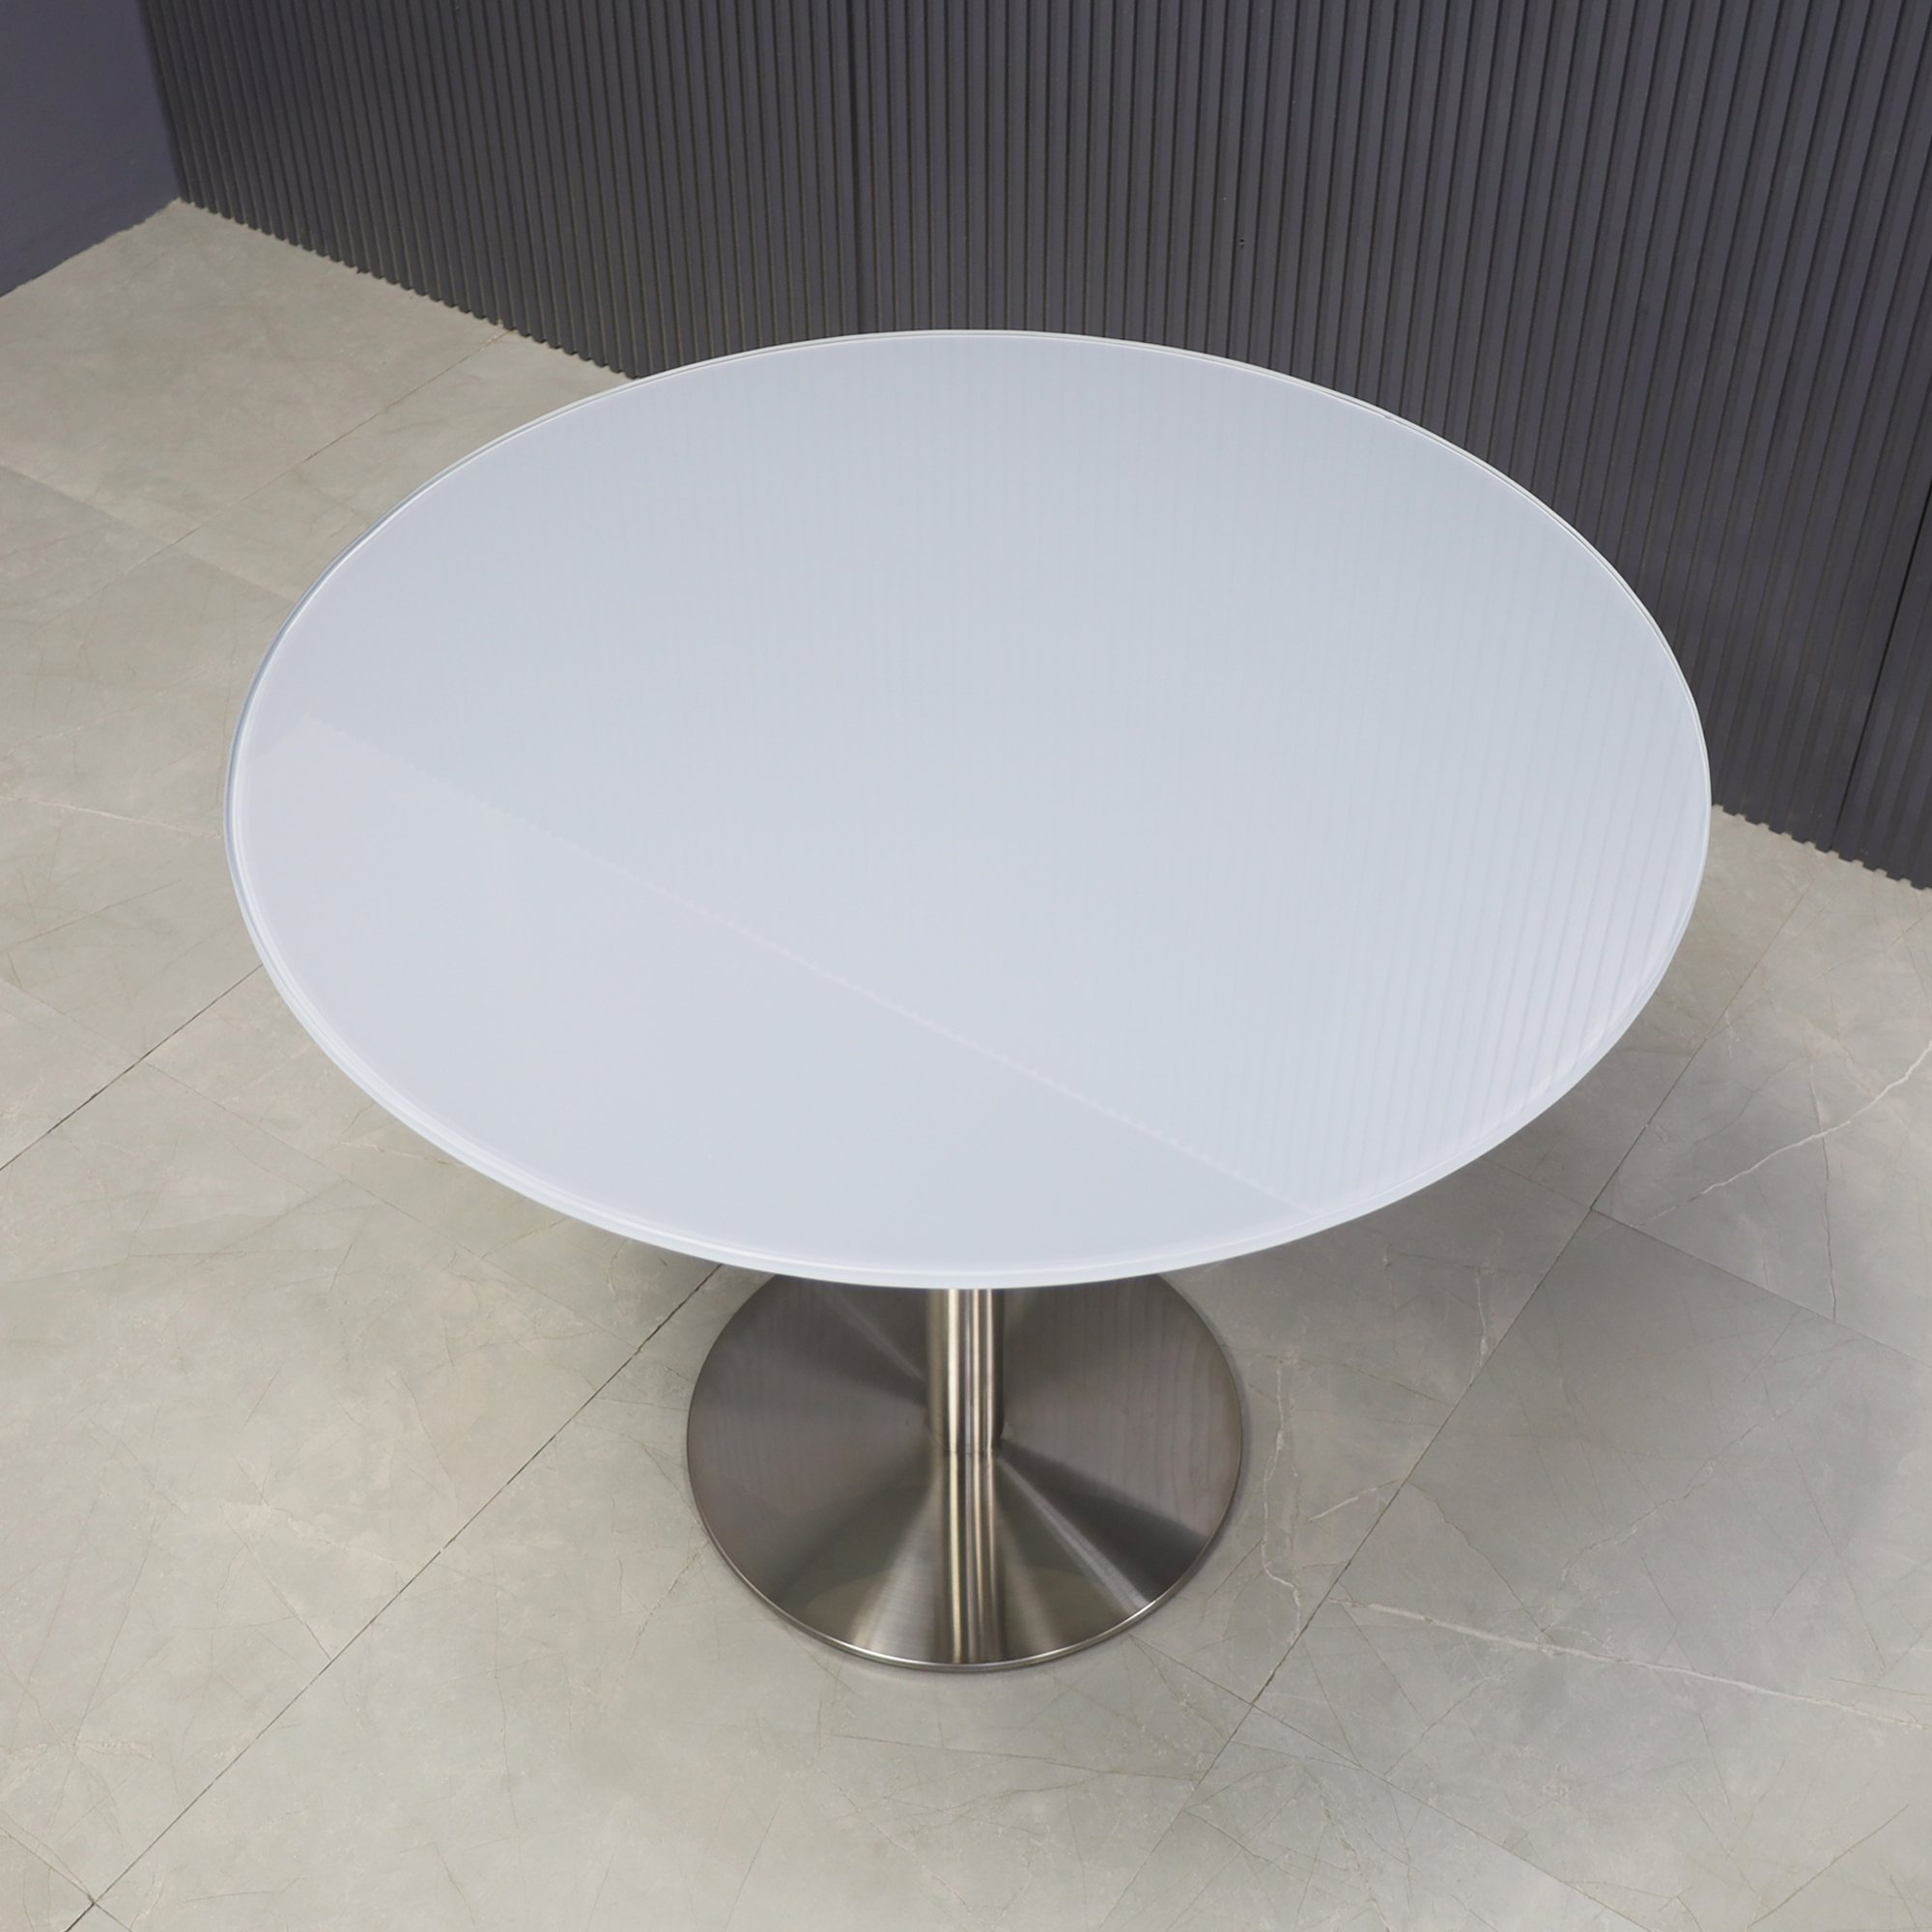 36-inch California Round Cafeteria Table in 1/2